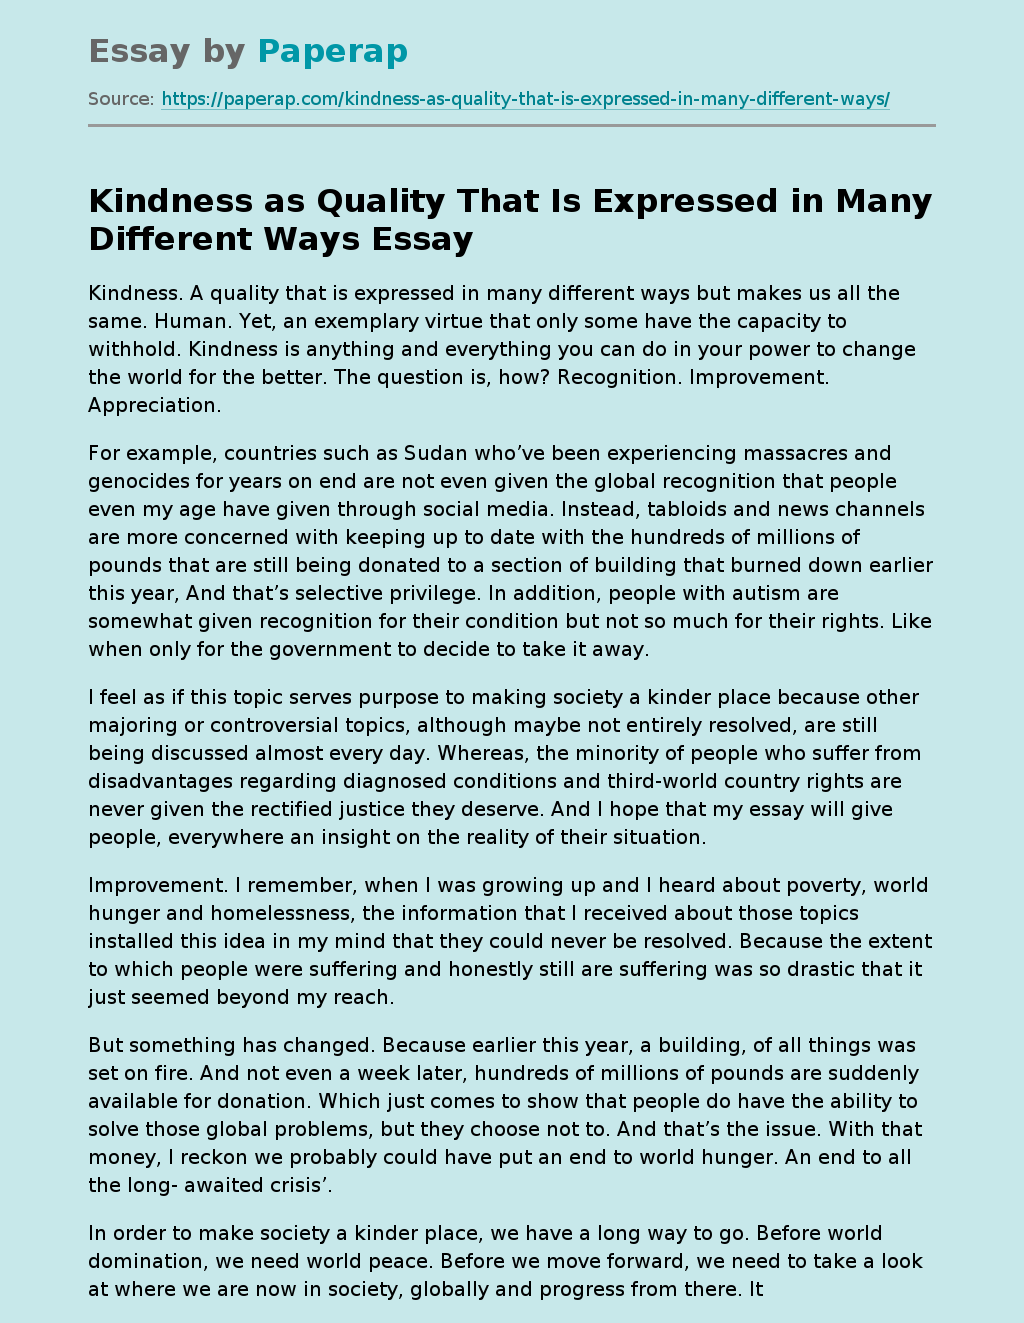 Kindness as Quality That Is Expressed in Many Different Ways